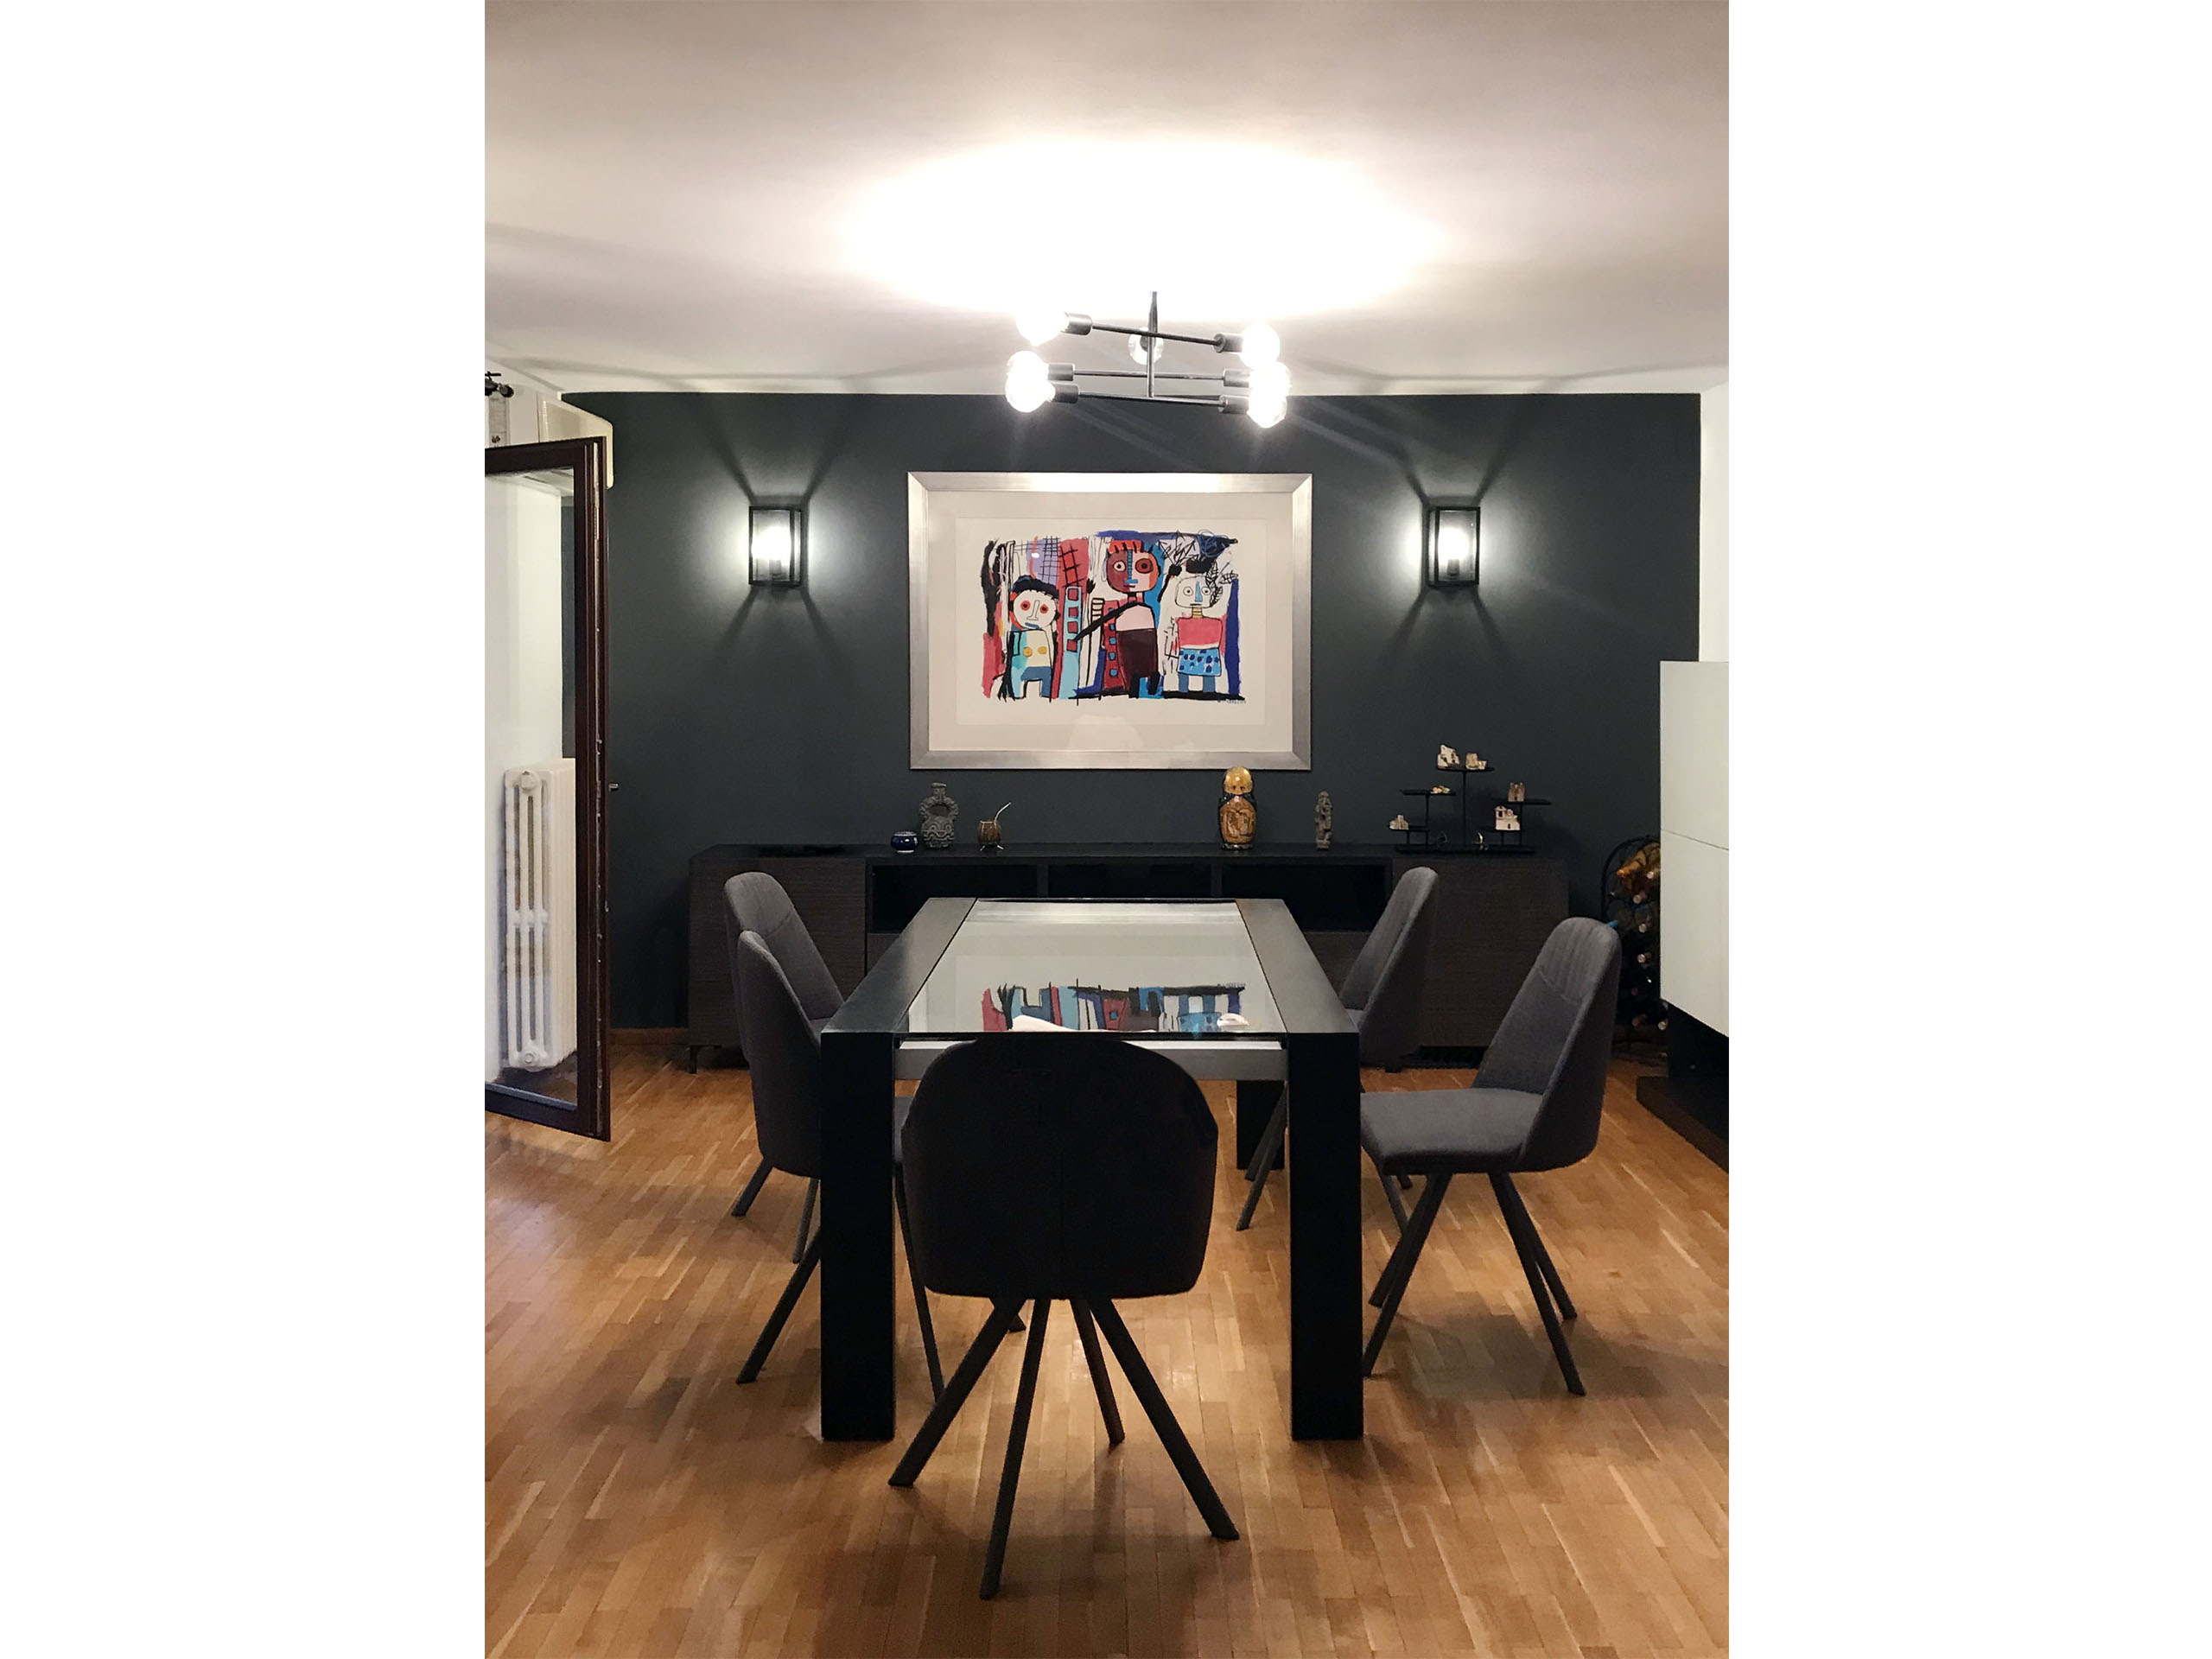 Dining table in front of a dark charcoal wall with bright colorful art standing out